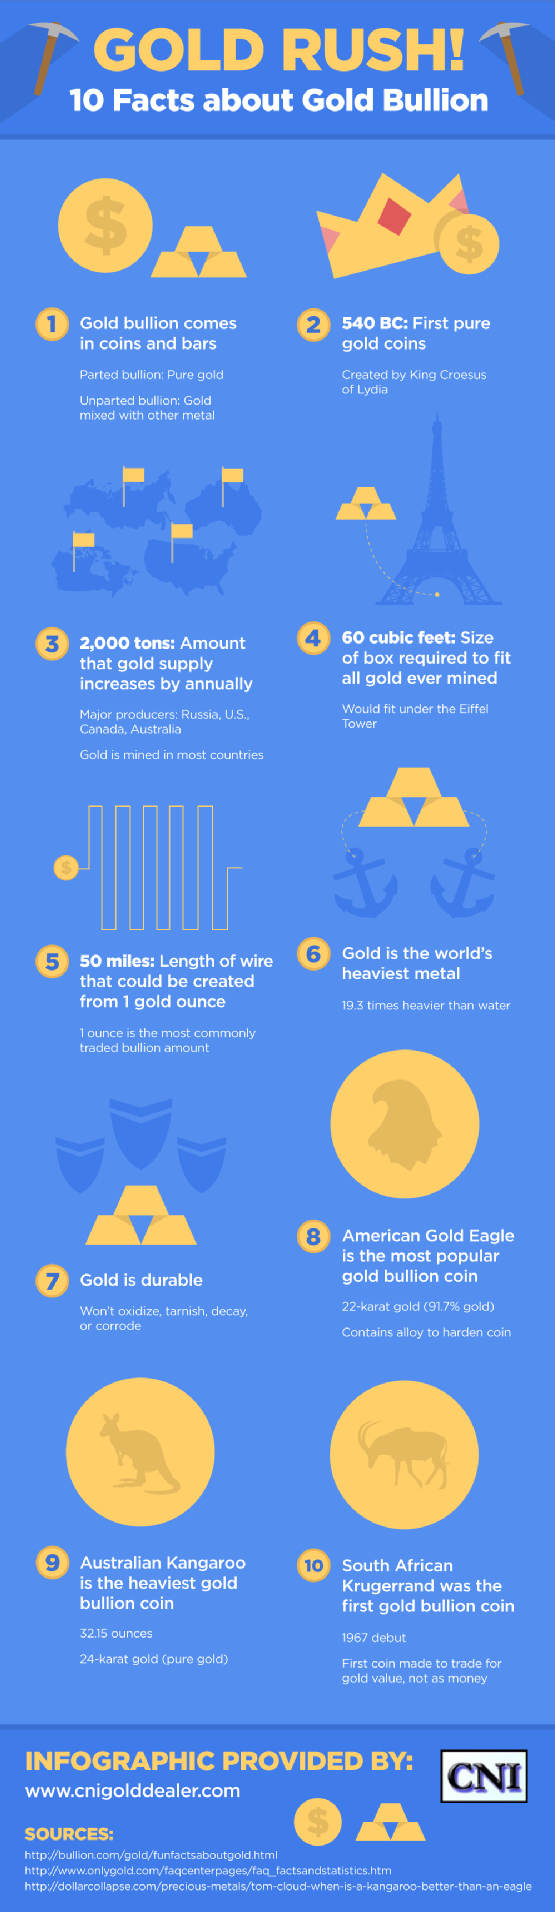 Gold-Rush-10-Facts-About-Gold-Bullion-Infographic